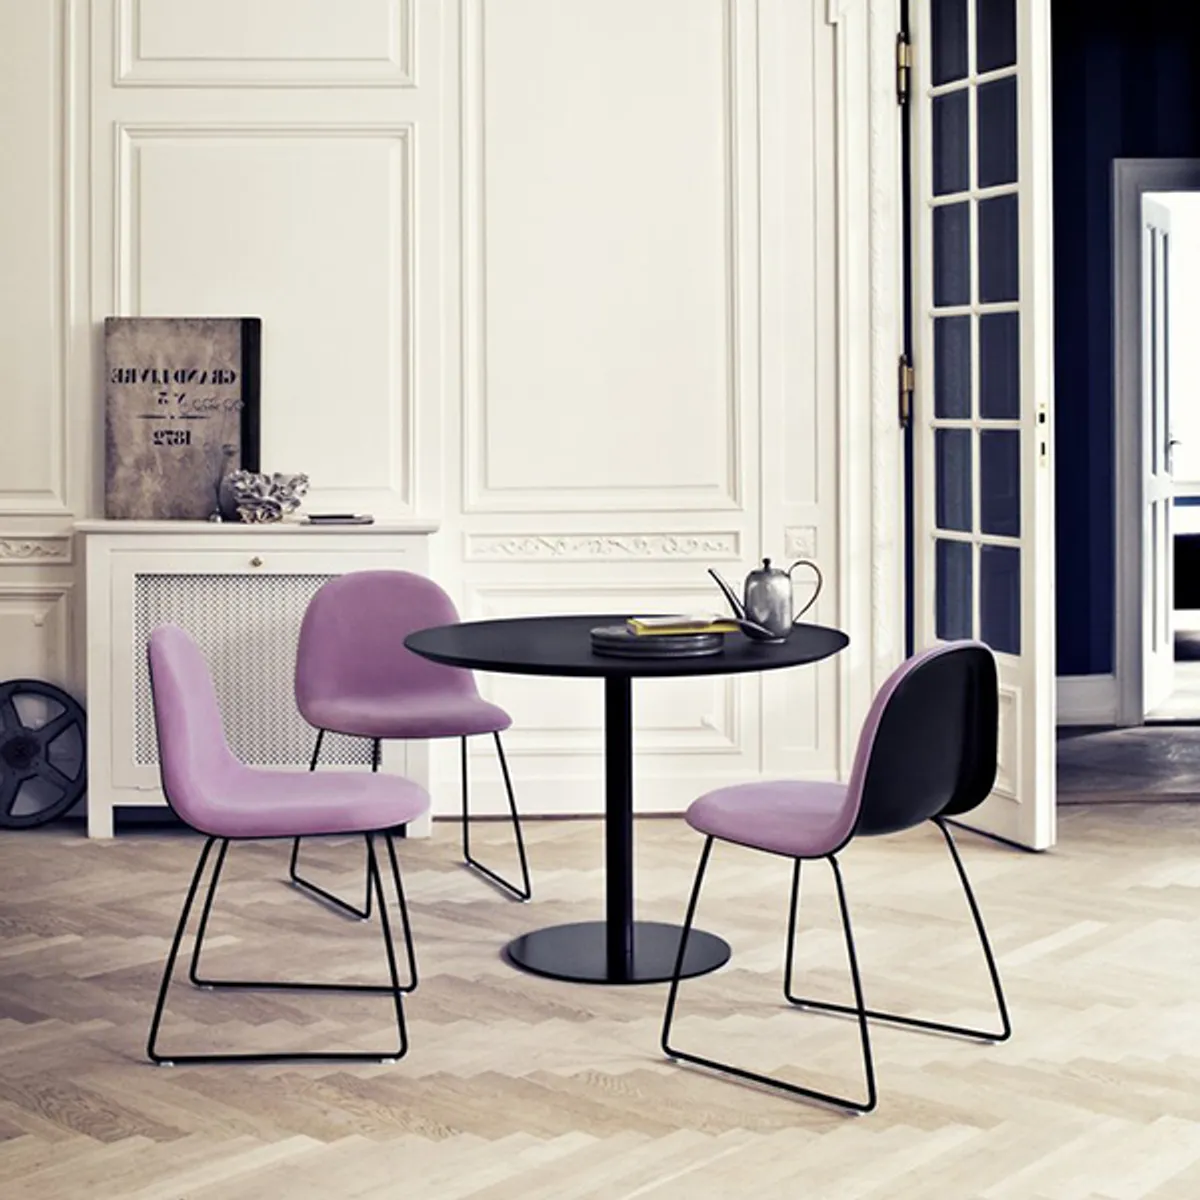 Gubi Chair With Metal Legs 2